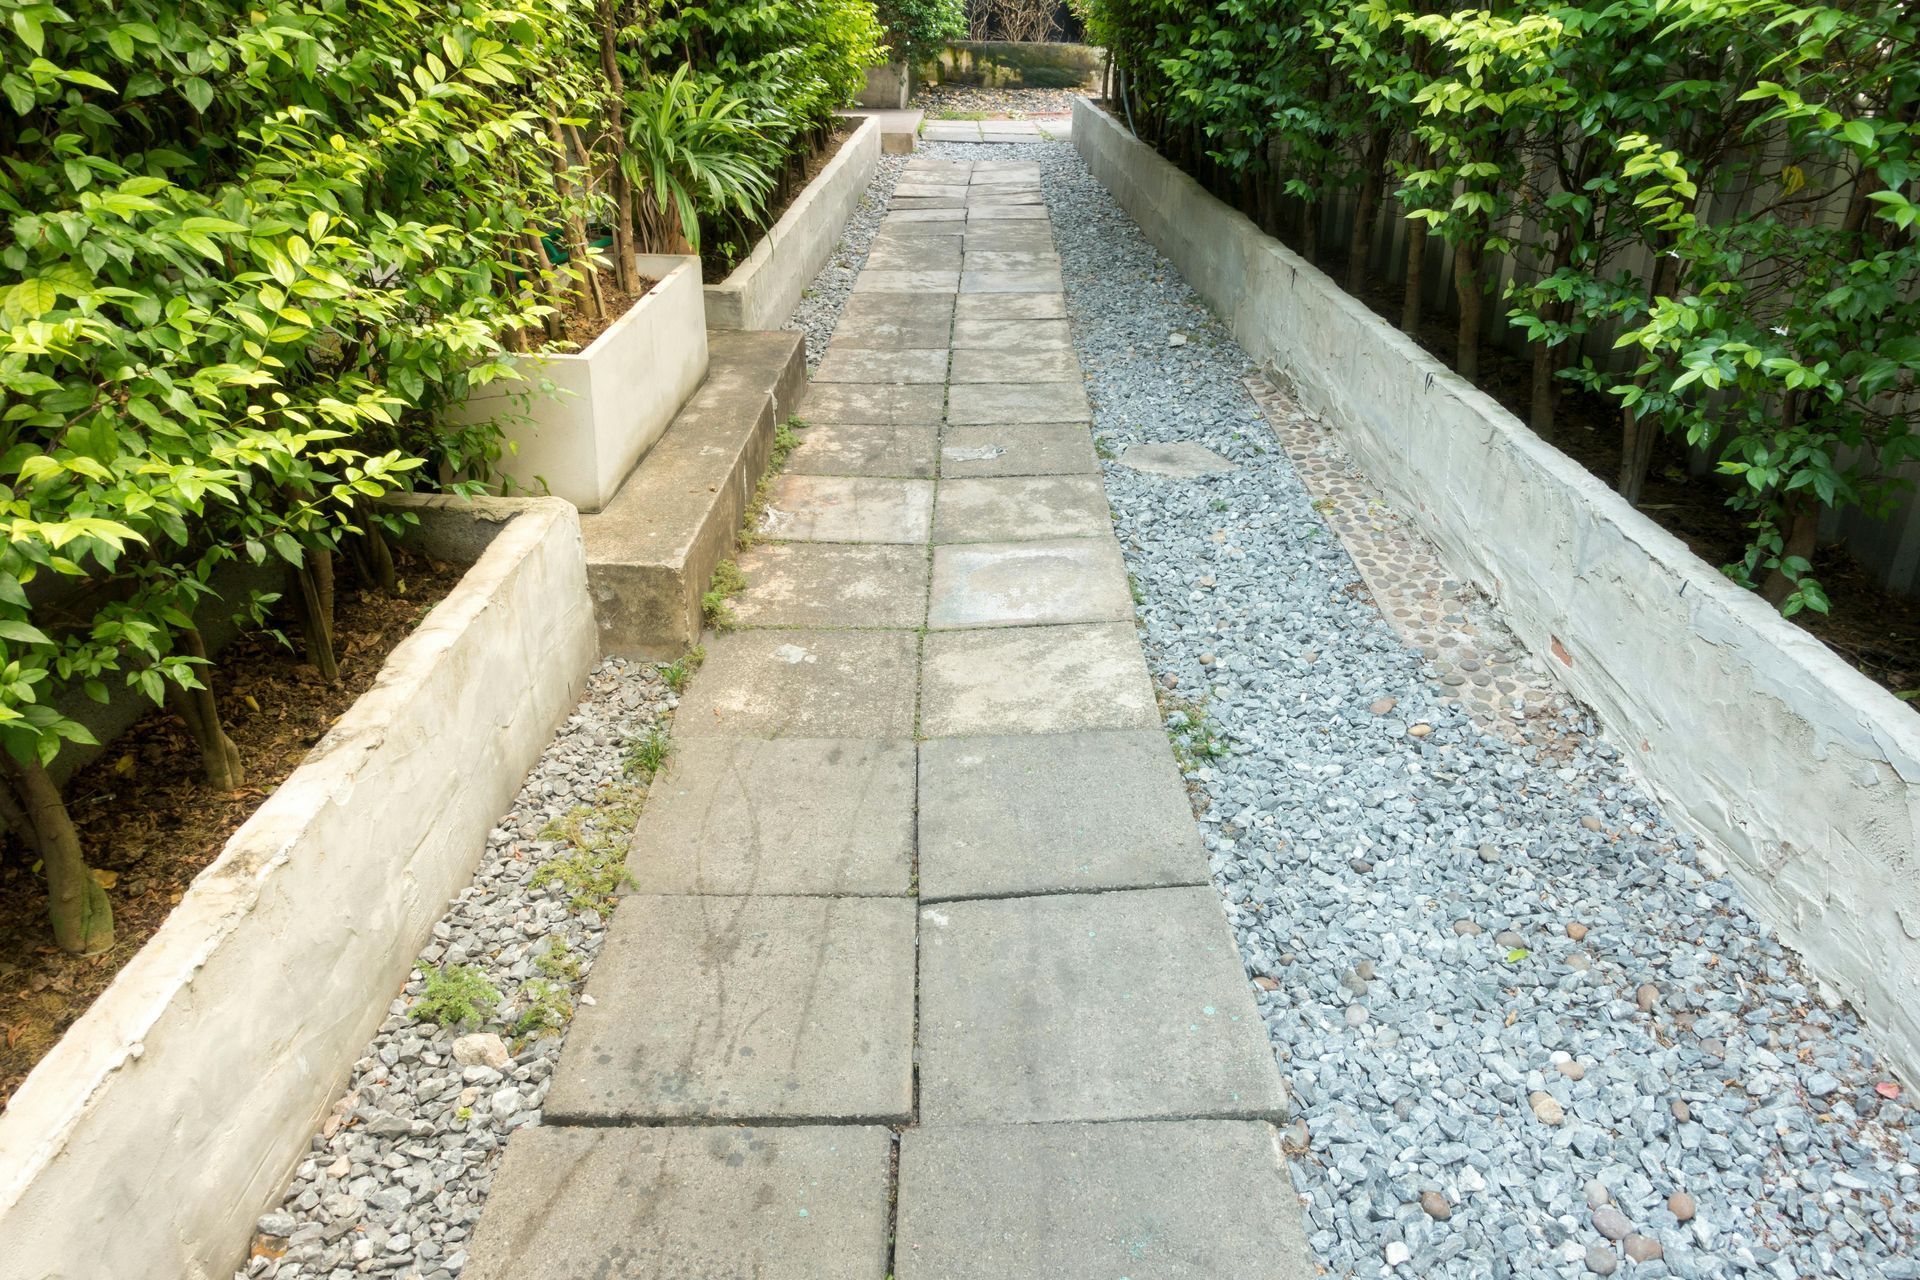 A stone walkway with gravel and trees on both sides